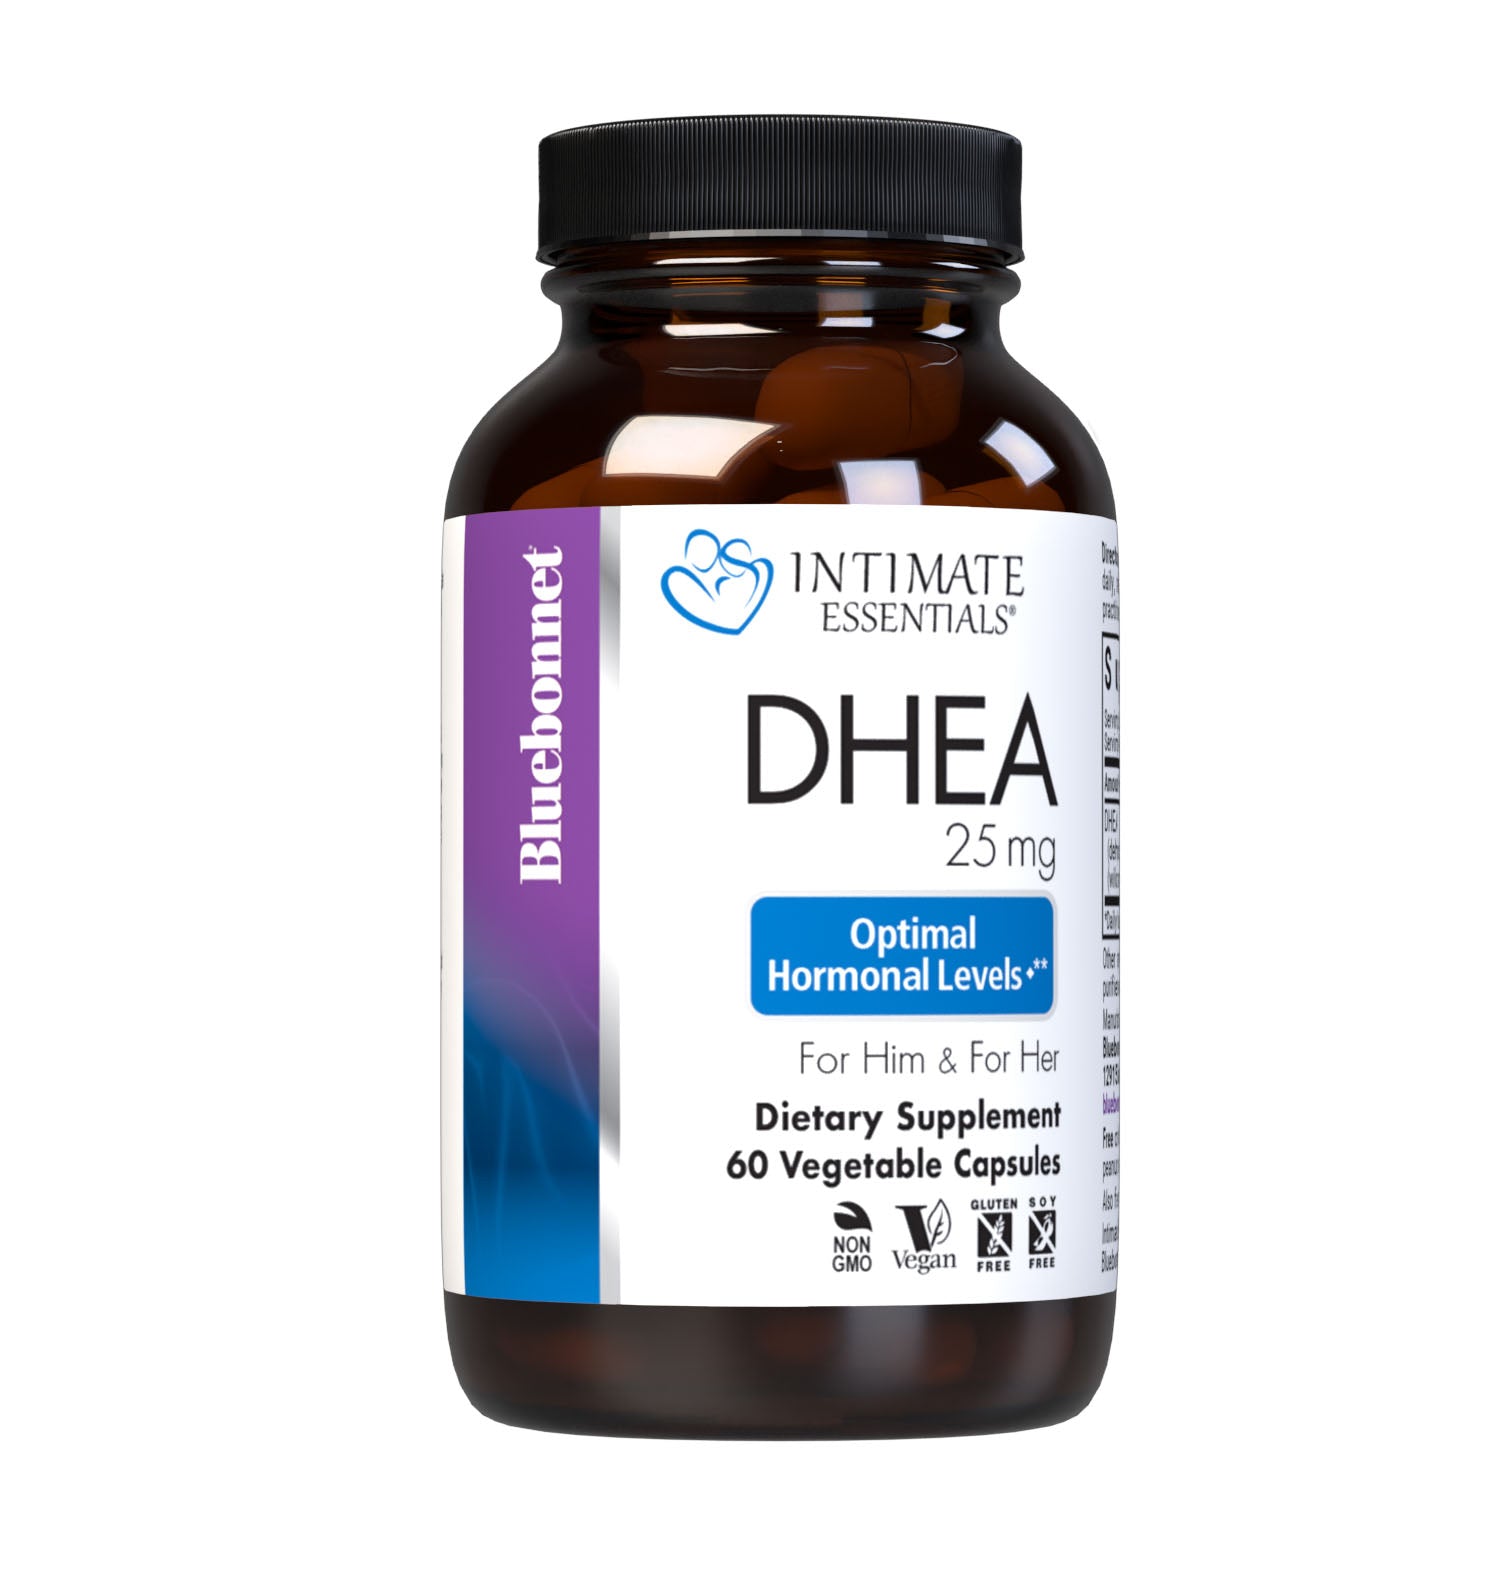 Bluebonnet’s Intimate Essentials DHEA 25 mg Vegetable Capsules derived from wild yams are specially formulated to support DHEA levels within the normal range for healthy sexual and fertility function in both men and women. #size_60 count